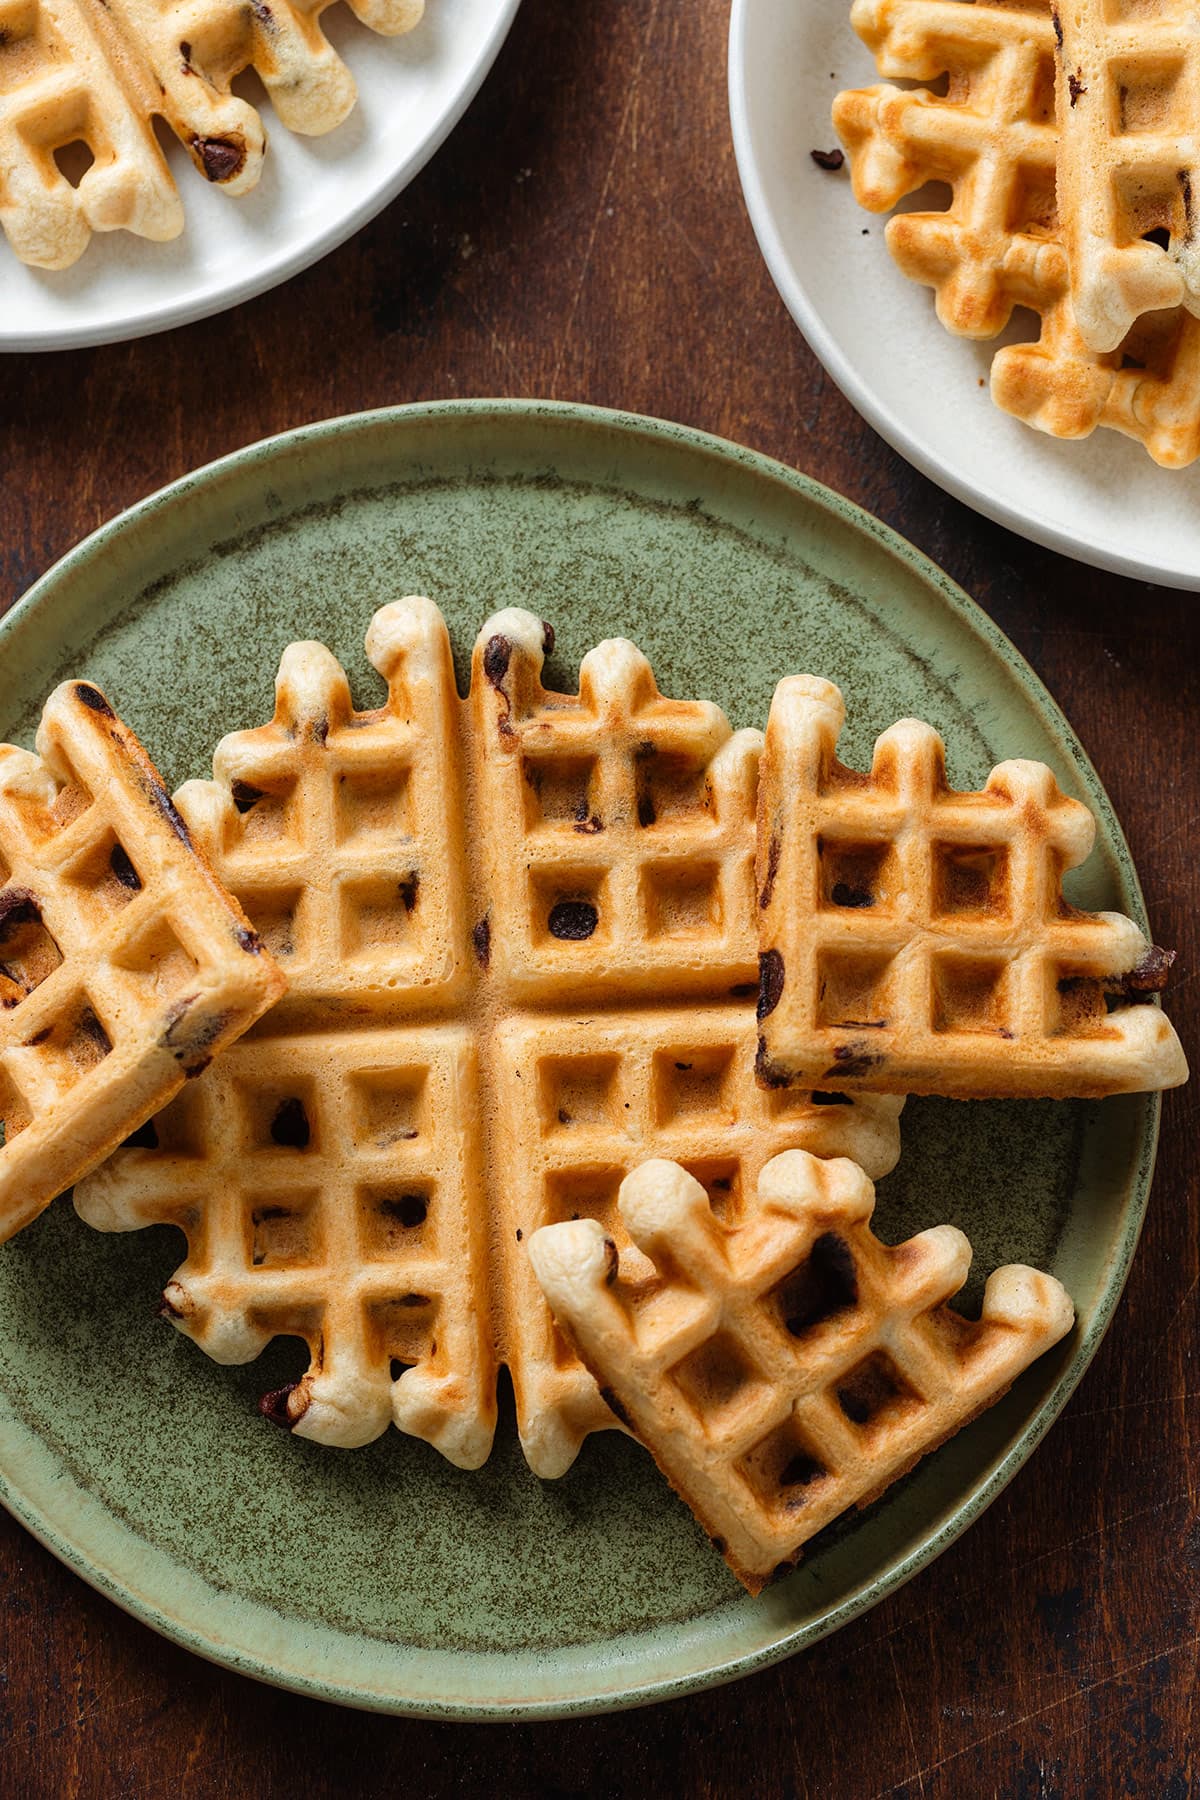 Chocolate chip waffles on a large green plate with more waffles on white plates around it on a dark wooden background.